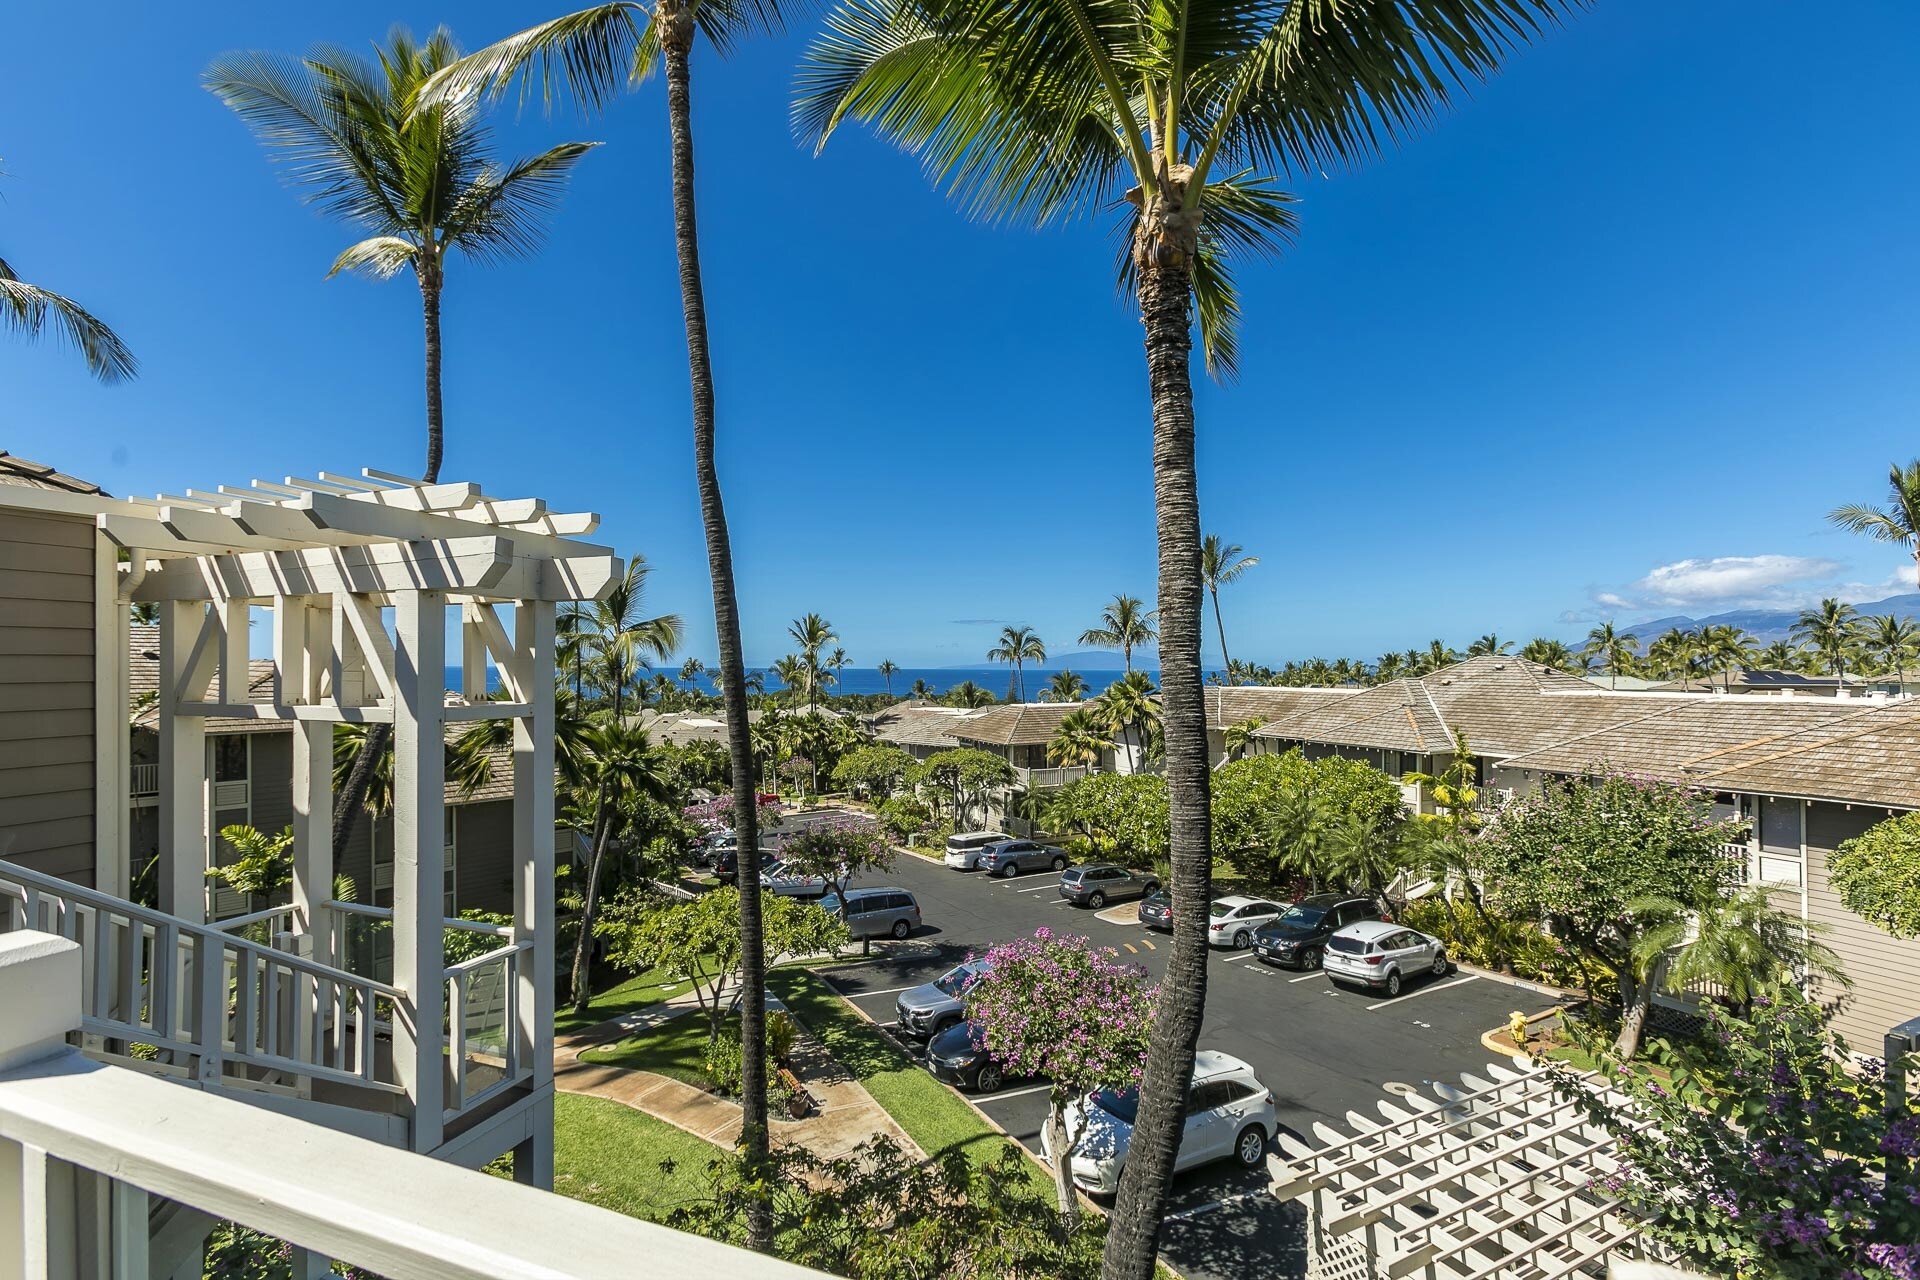 Step out on the lanai for some fresh air